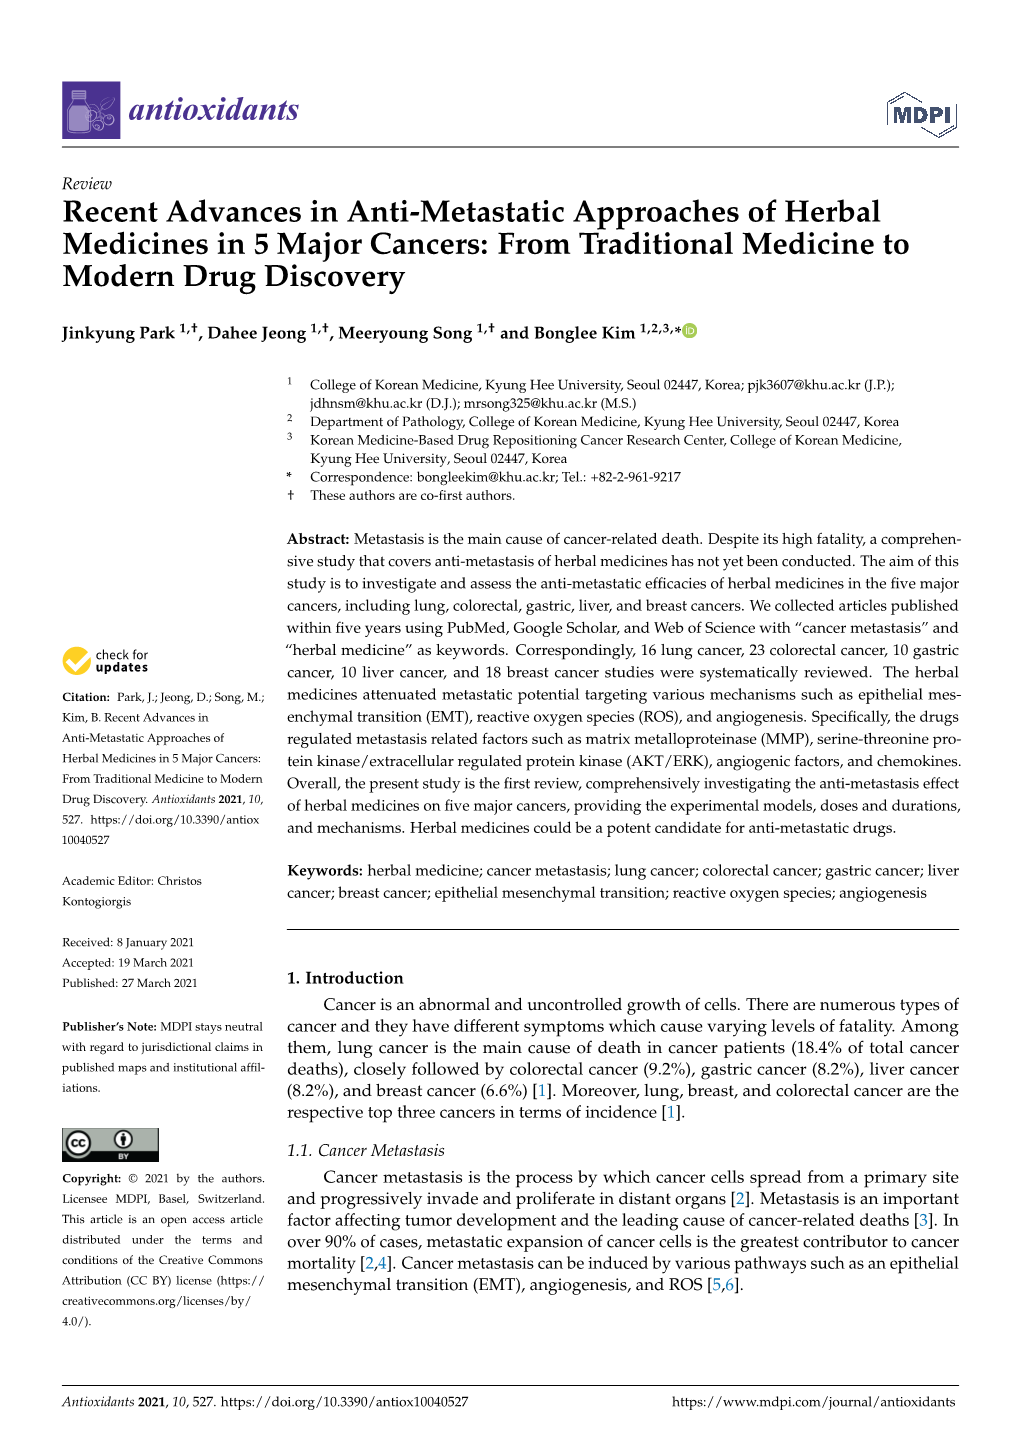 Recent Advances in Anti-Metastatic Approaches of Herbal Medicines in 5 Major Cancers: from Traditional Medicine to Modern Drug Discovery